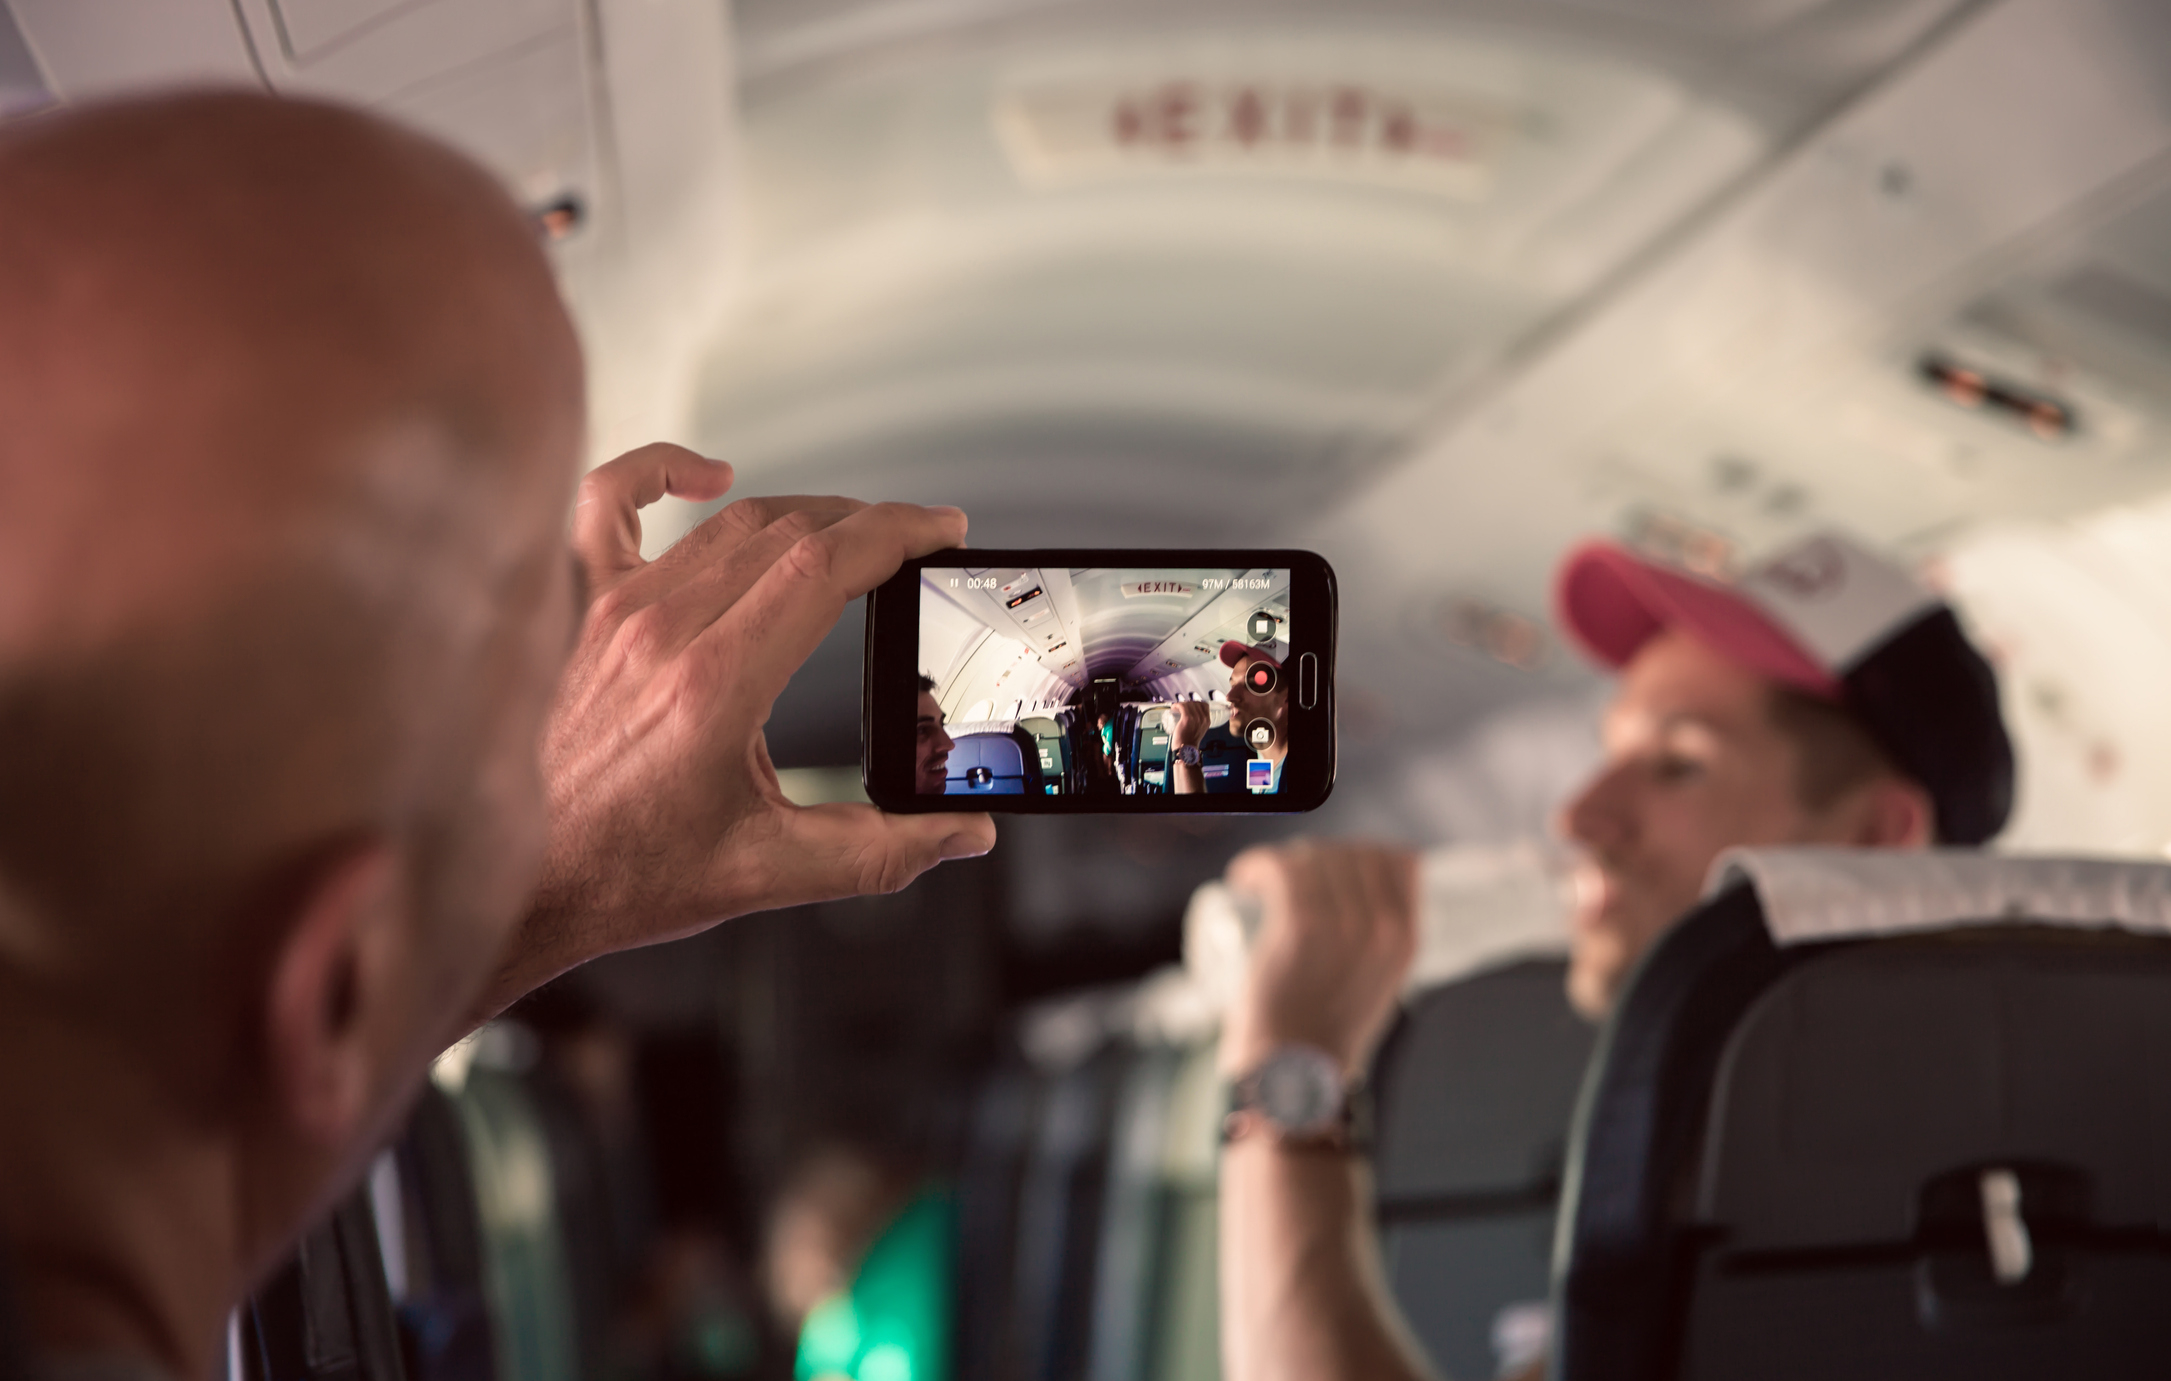 Person taking photo inside airplane with smartphone capturing other passengers